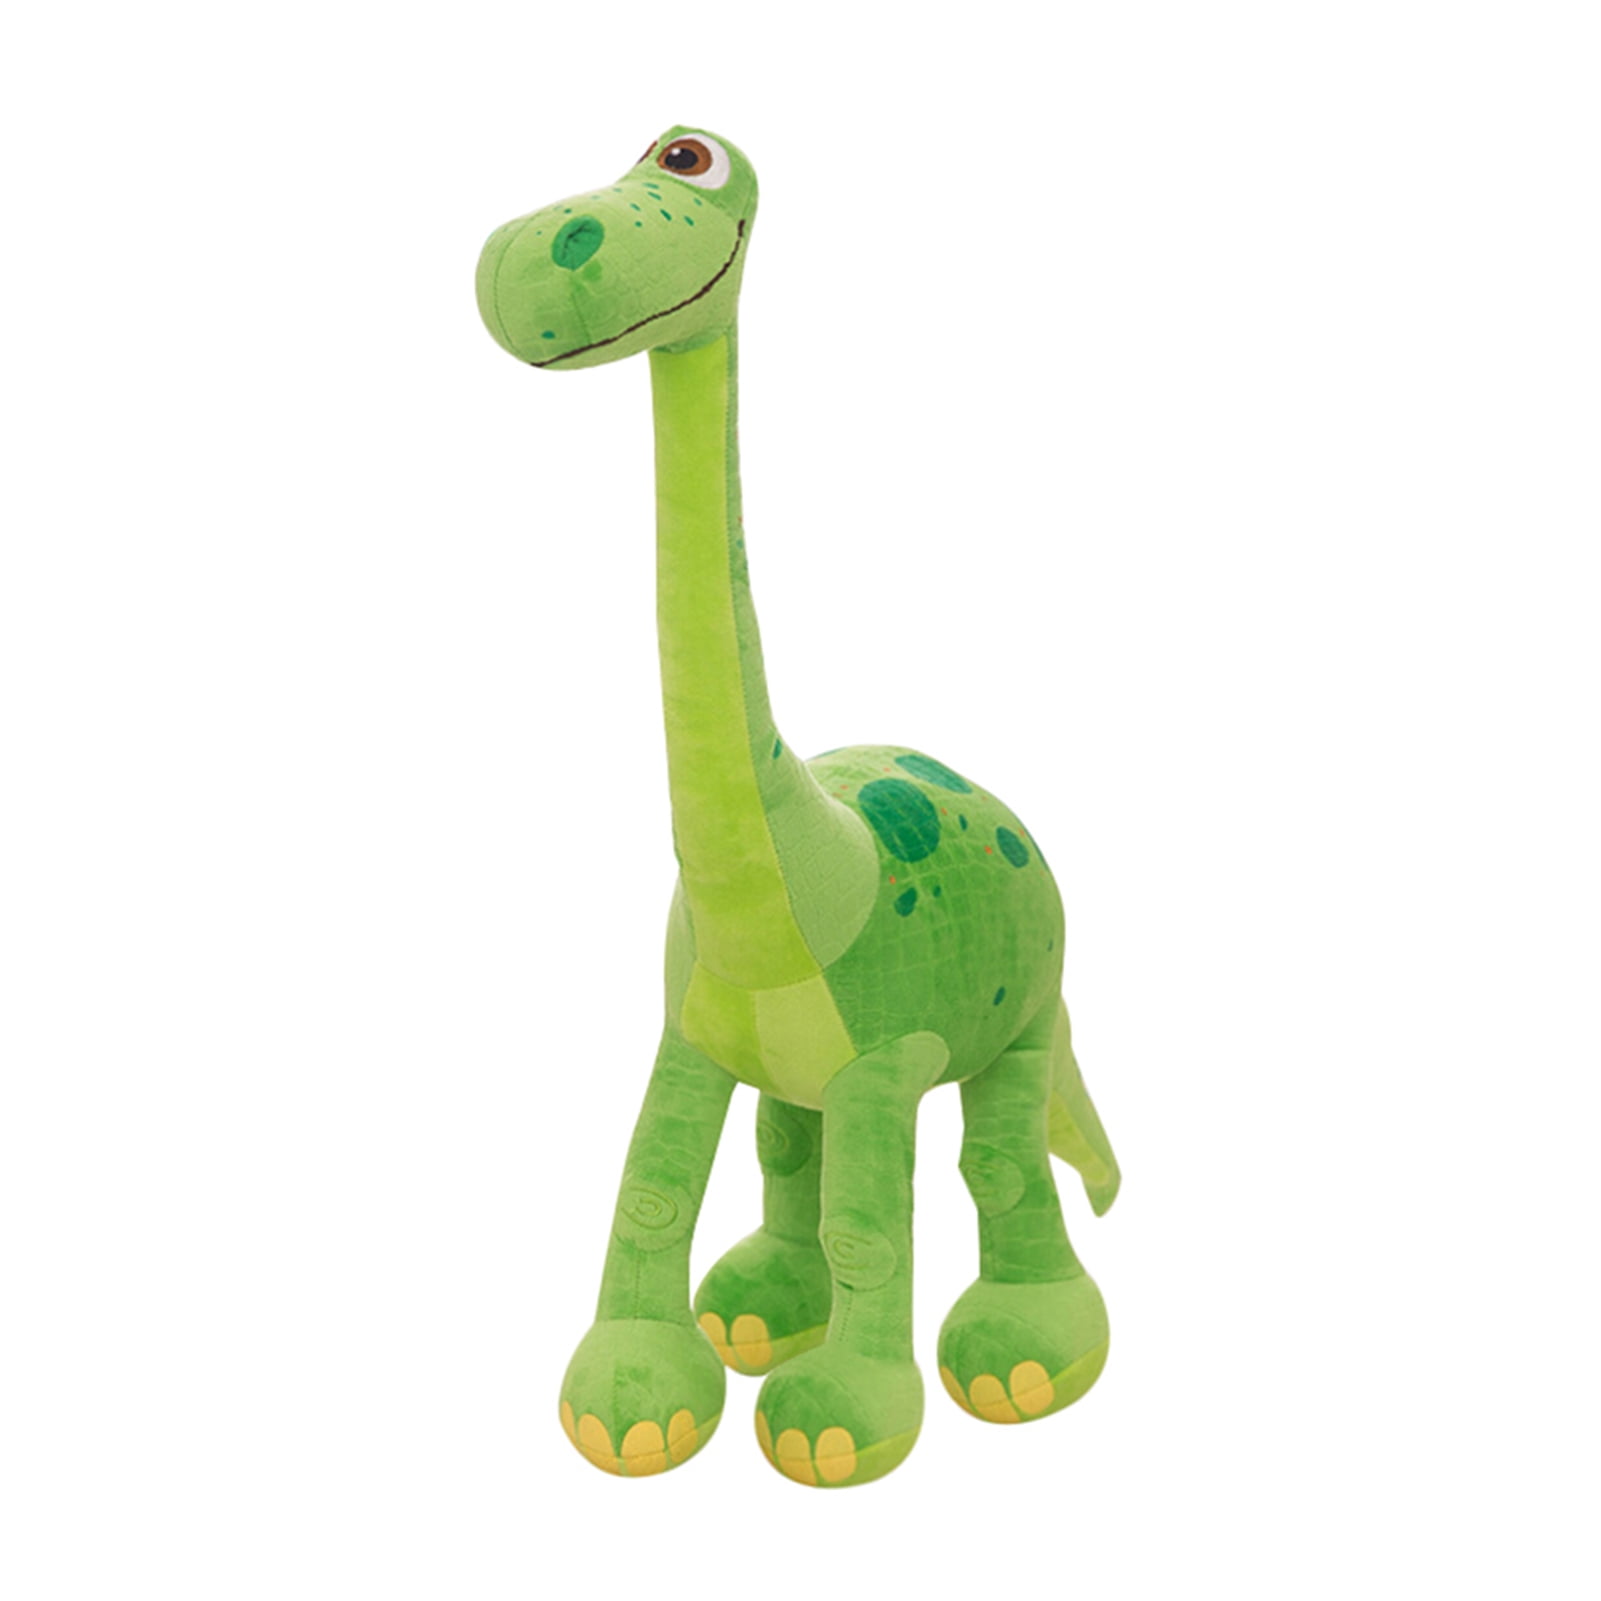 Details about   The Good Dinosaur Arlo Human Spot Plush Toy Soft Stuffed Dolls for Kids Gift HT 